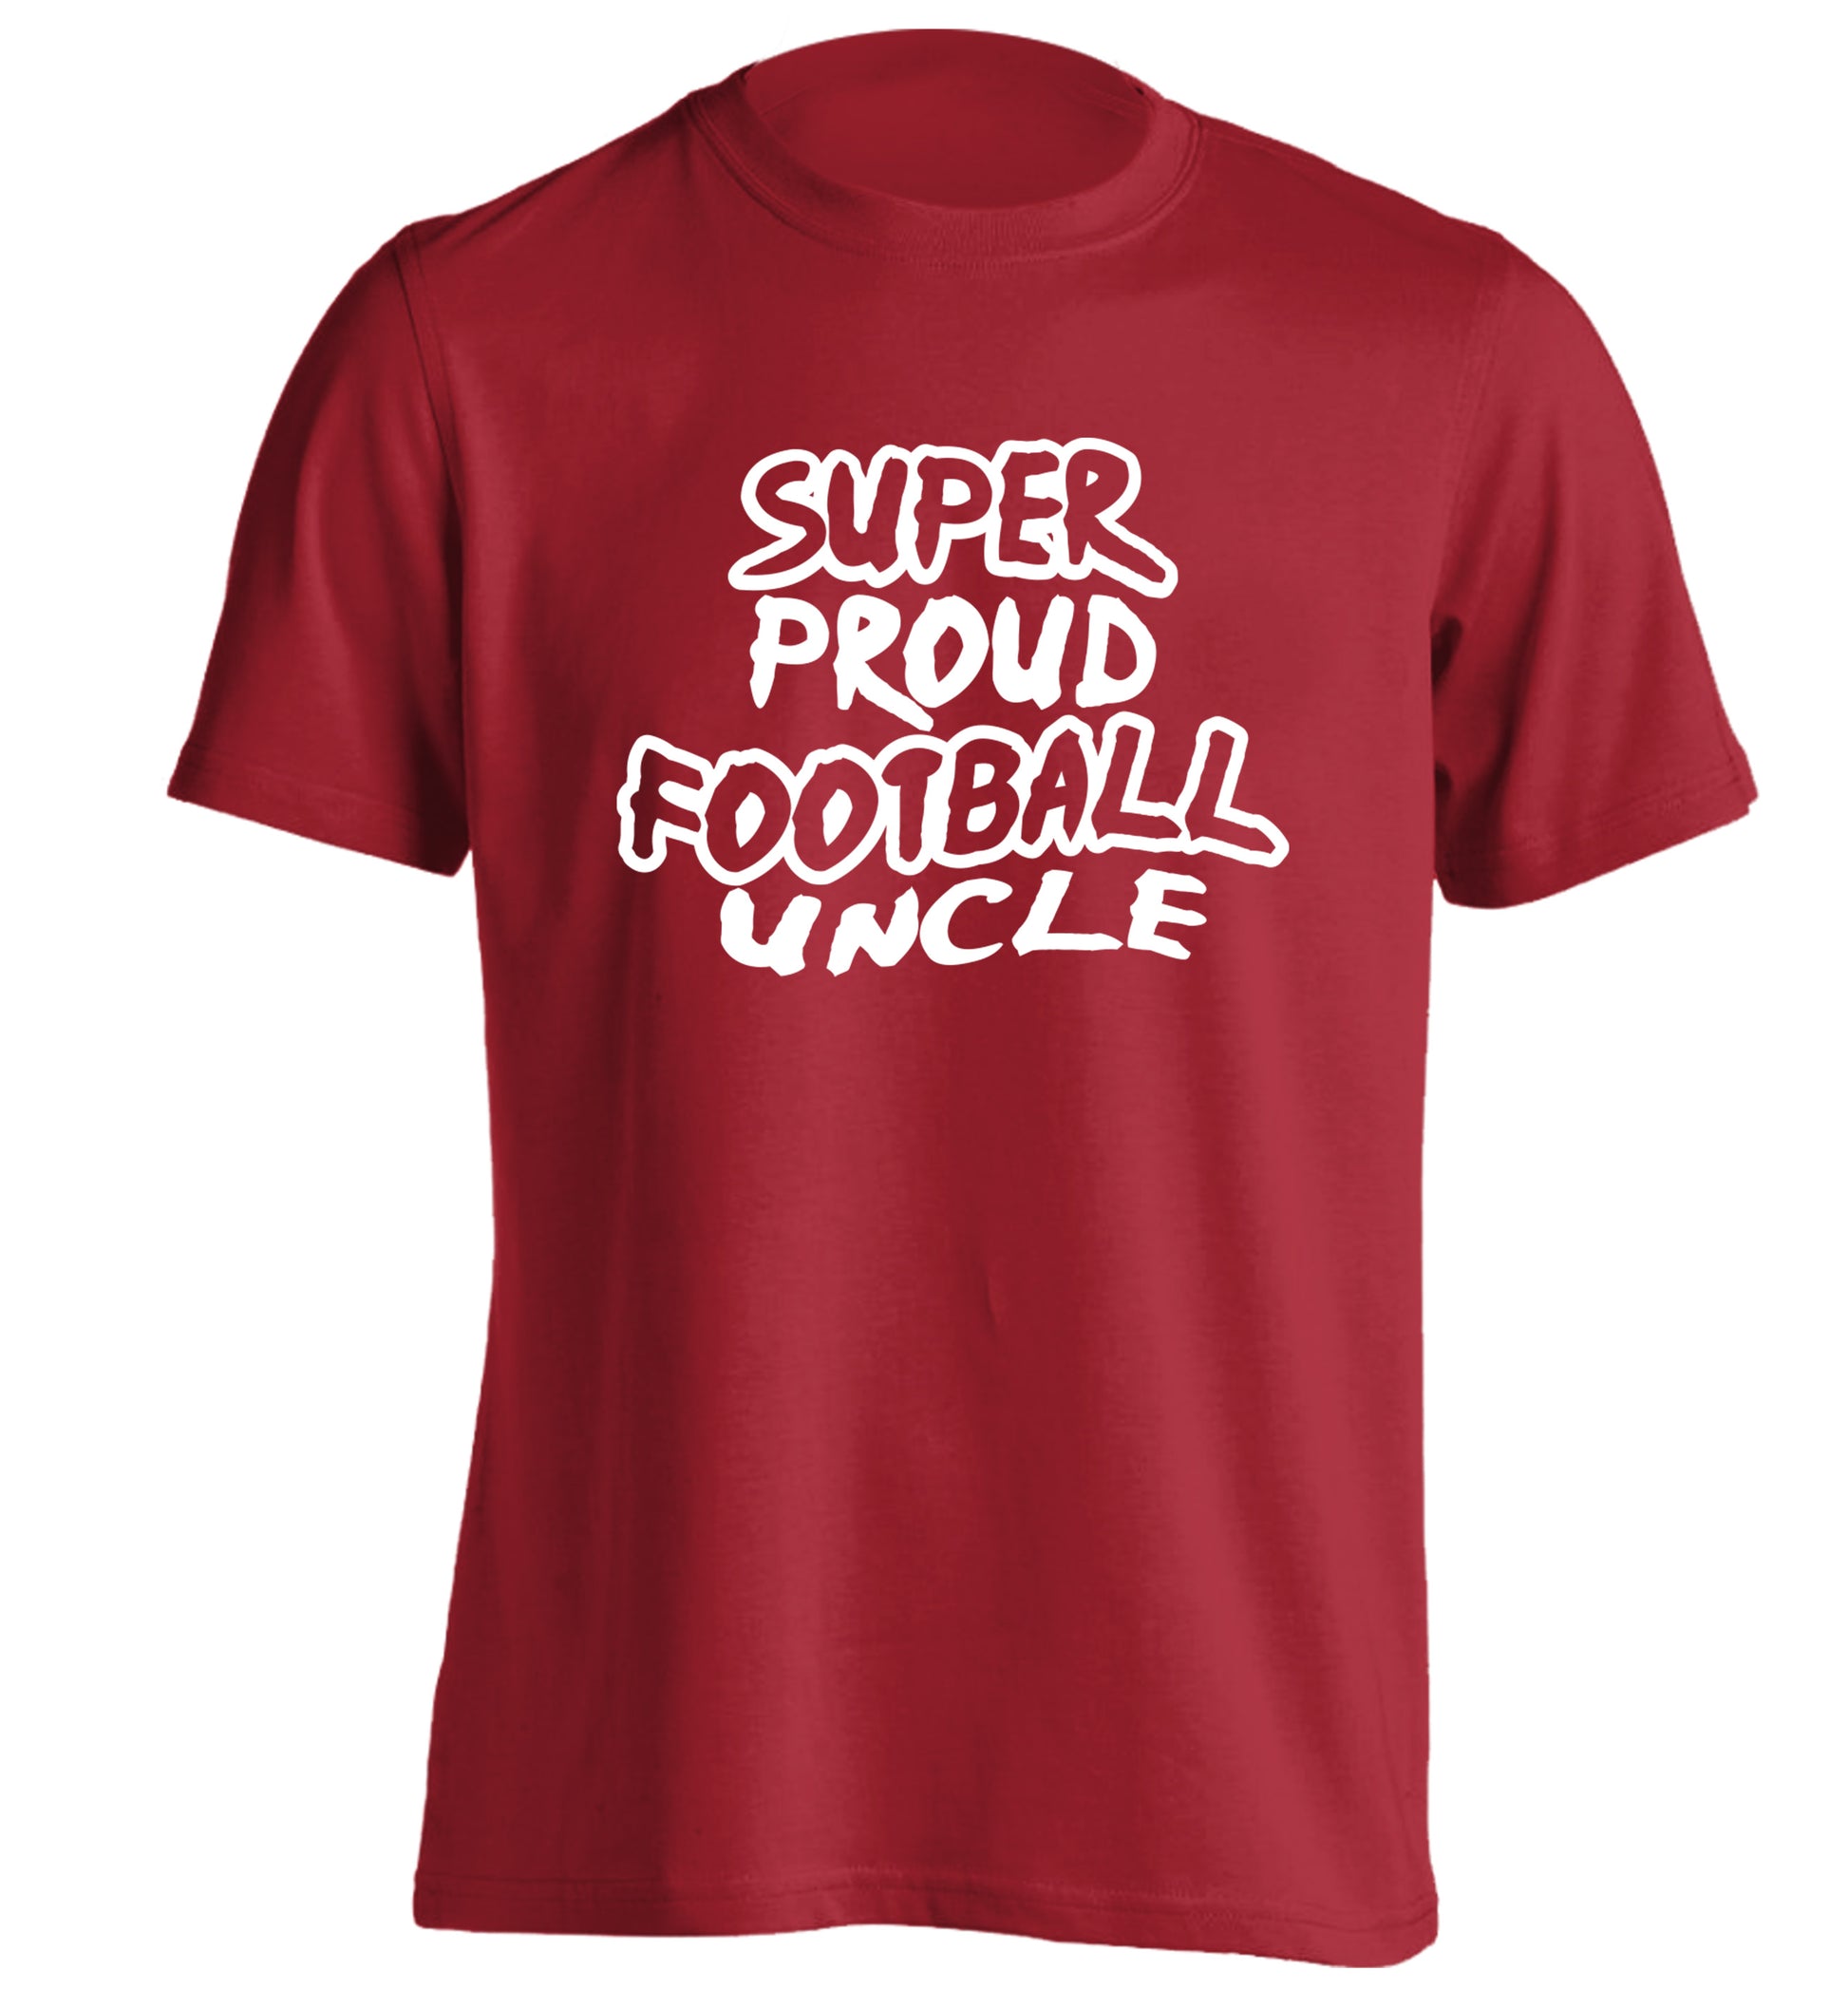 Super proud football uncle adults unisexred Tshirt 2XL